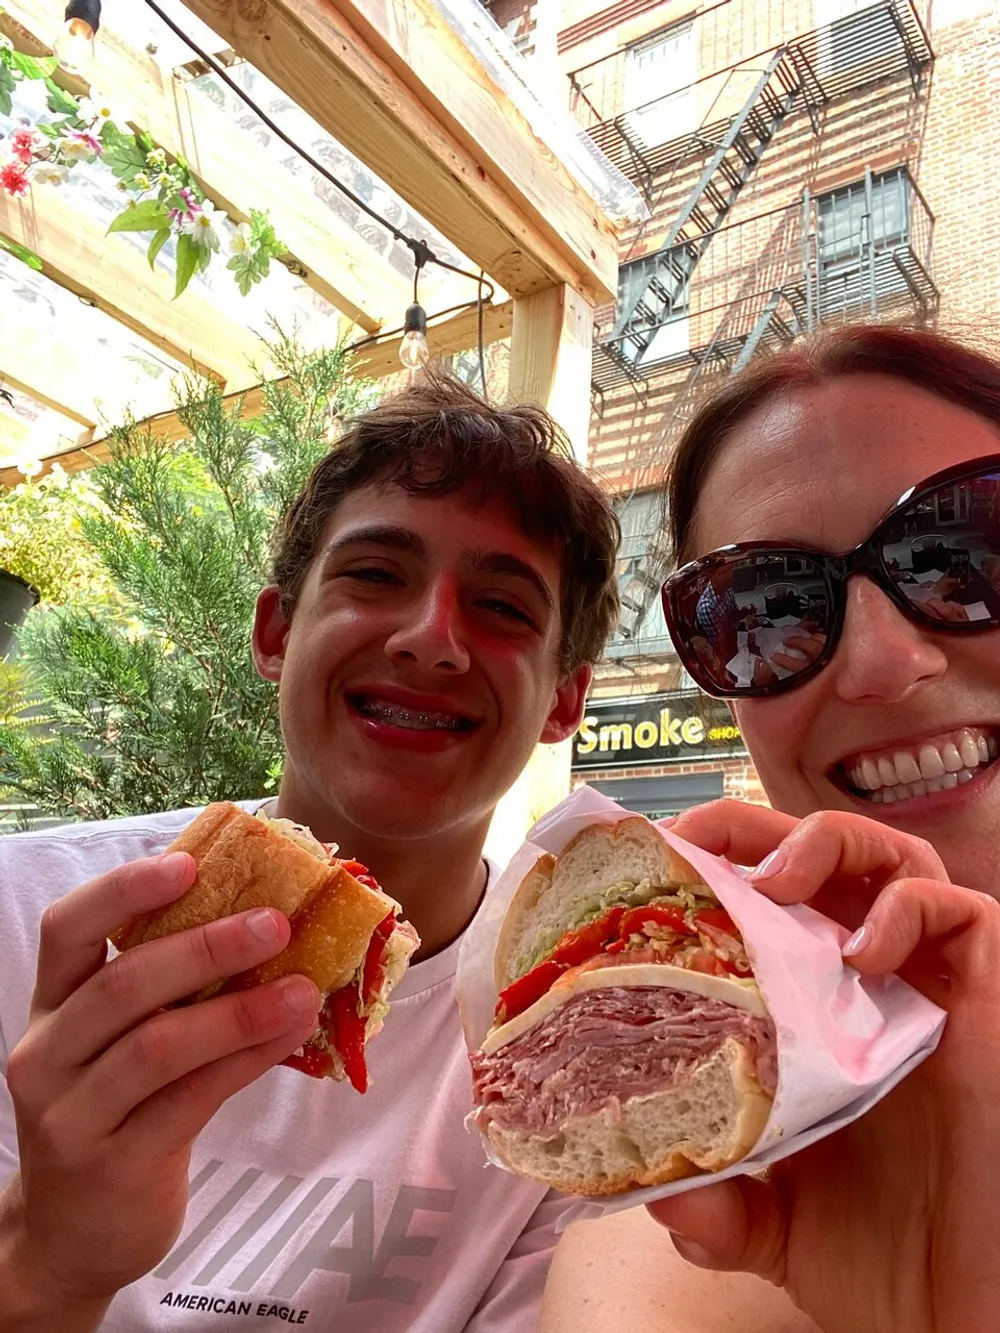 A smiling young man and a woman wearing sunglasses pose with sandwiches in an outdoor setting with a fire escape ladder visible in the background